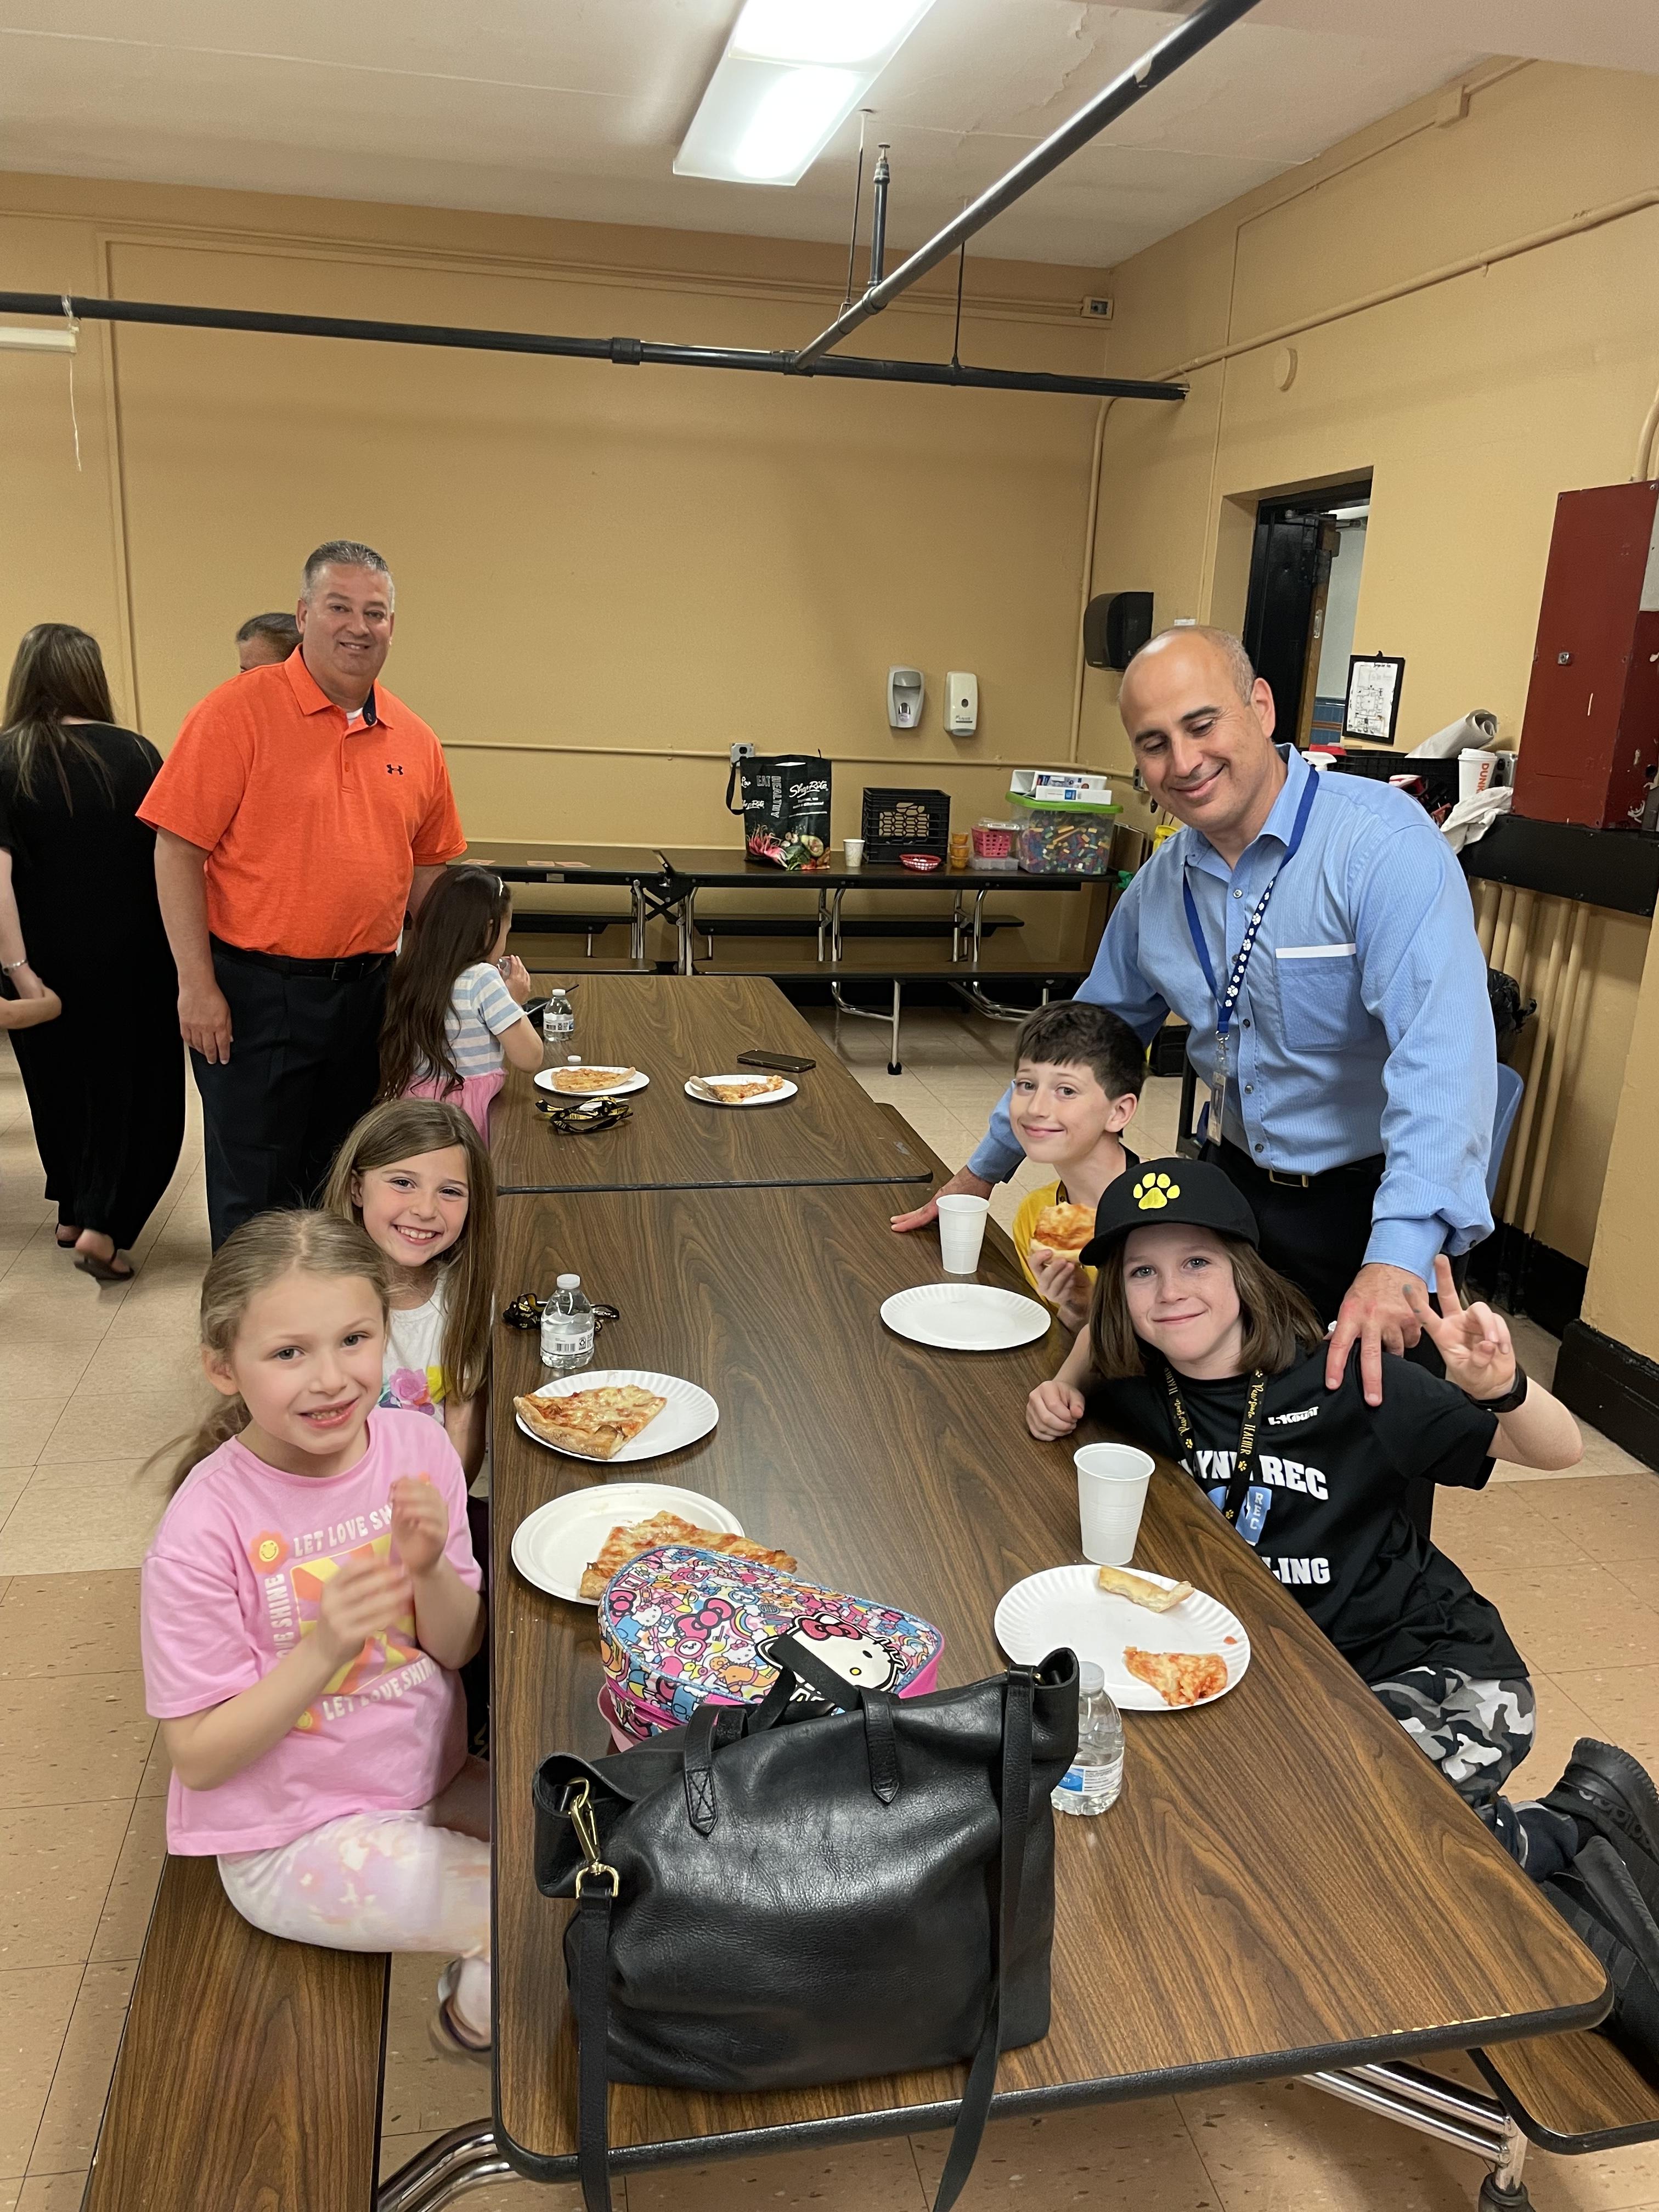 The Washington School celebrated Bring Your Child To Work Day